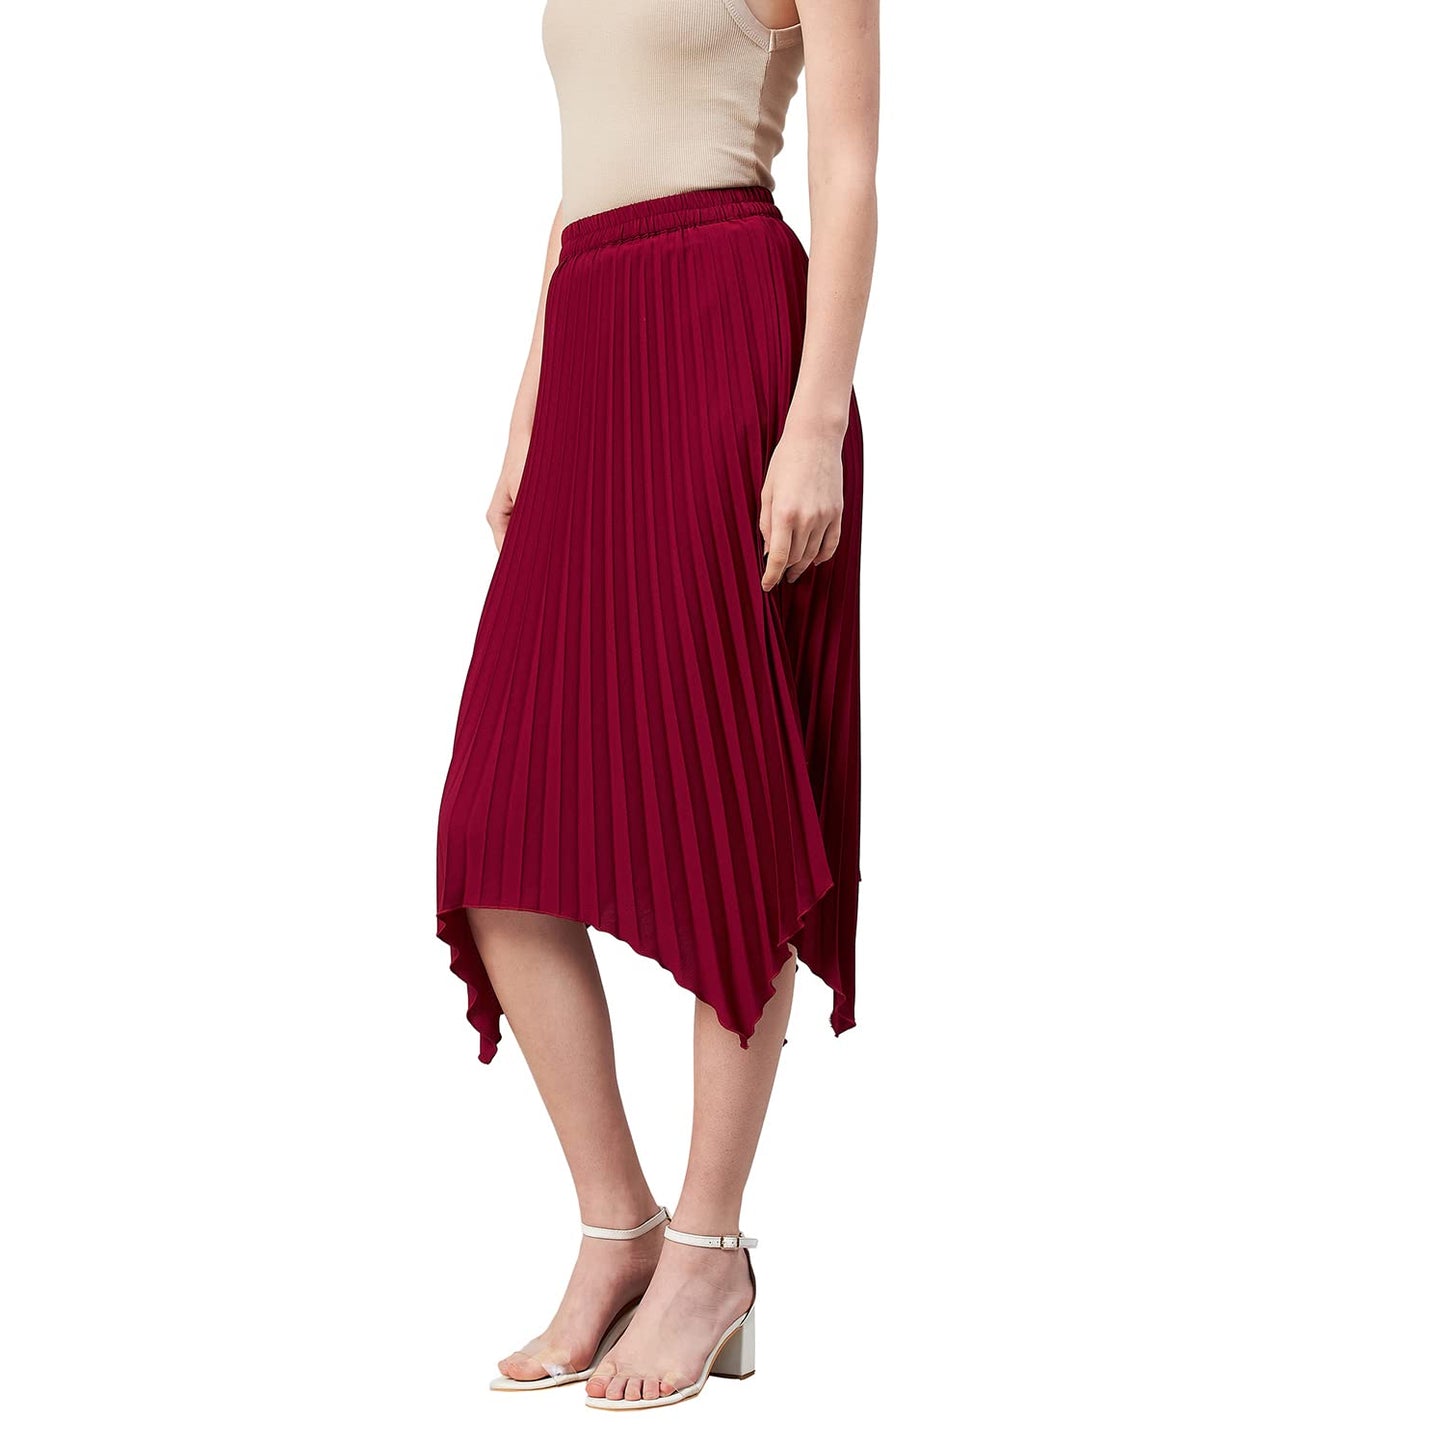 Marie Claire Women Casual Maroon Colour Solid A-Line Skirt